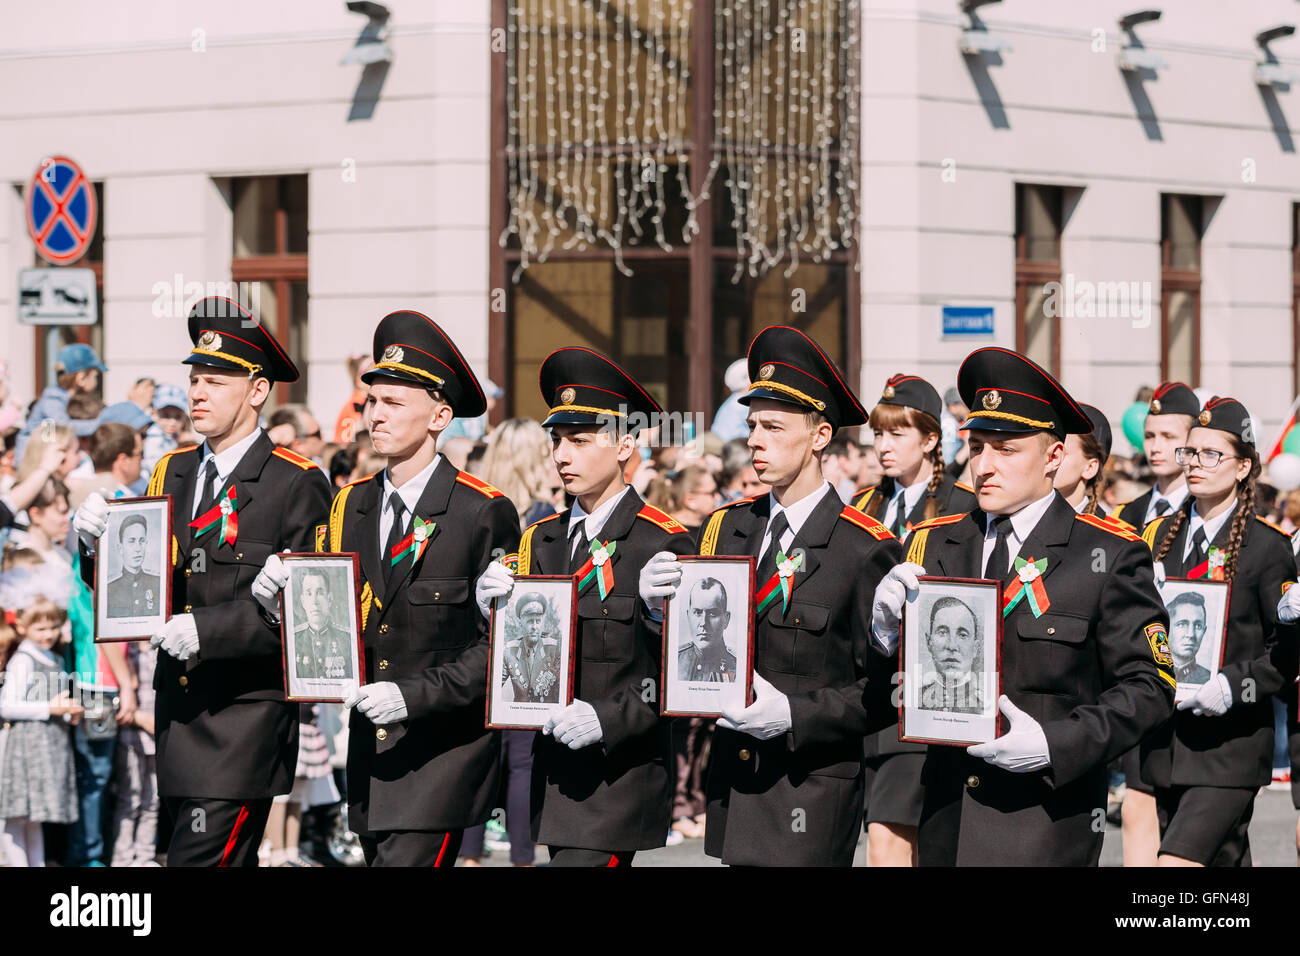 The Marching Formation Of Cadet Guys From Gomel State Cadet School With Portraits Of WW2 Heroes Foreground Of Ceremonial Parade Stock Photo